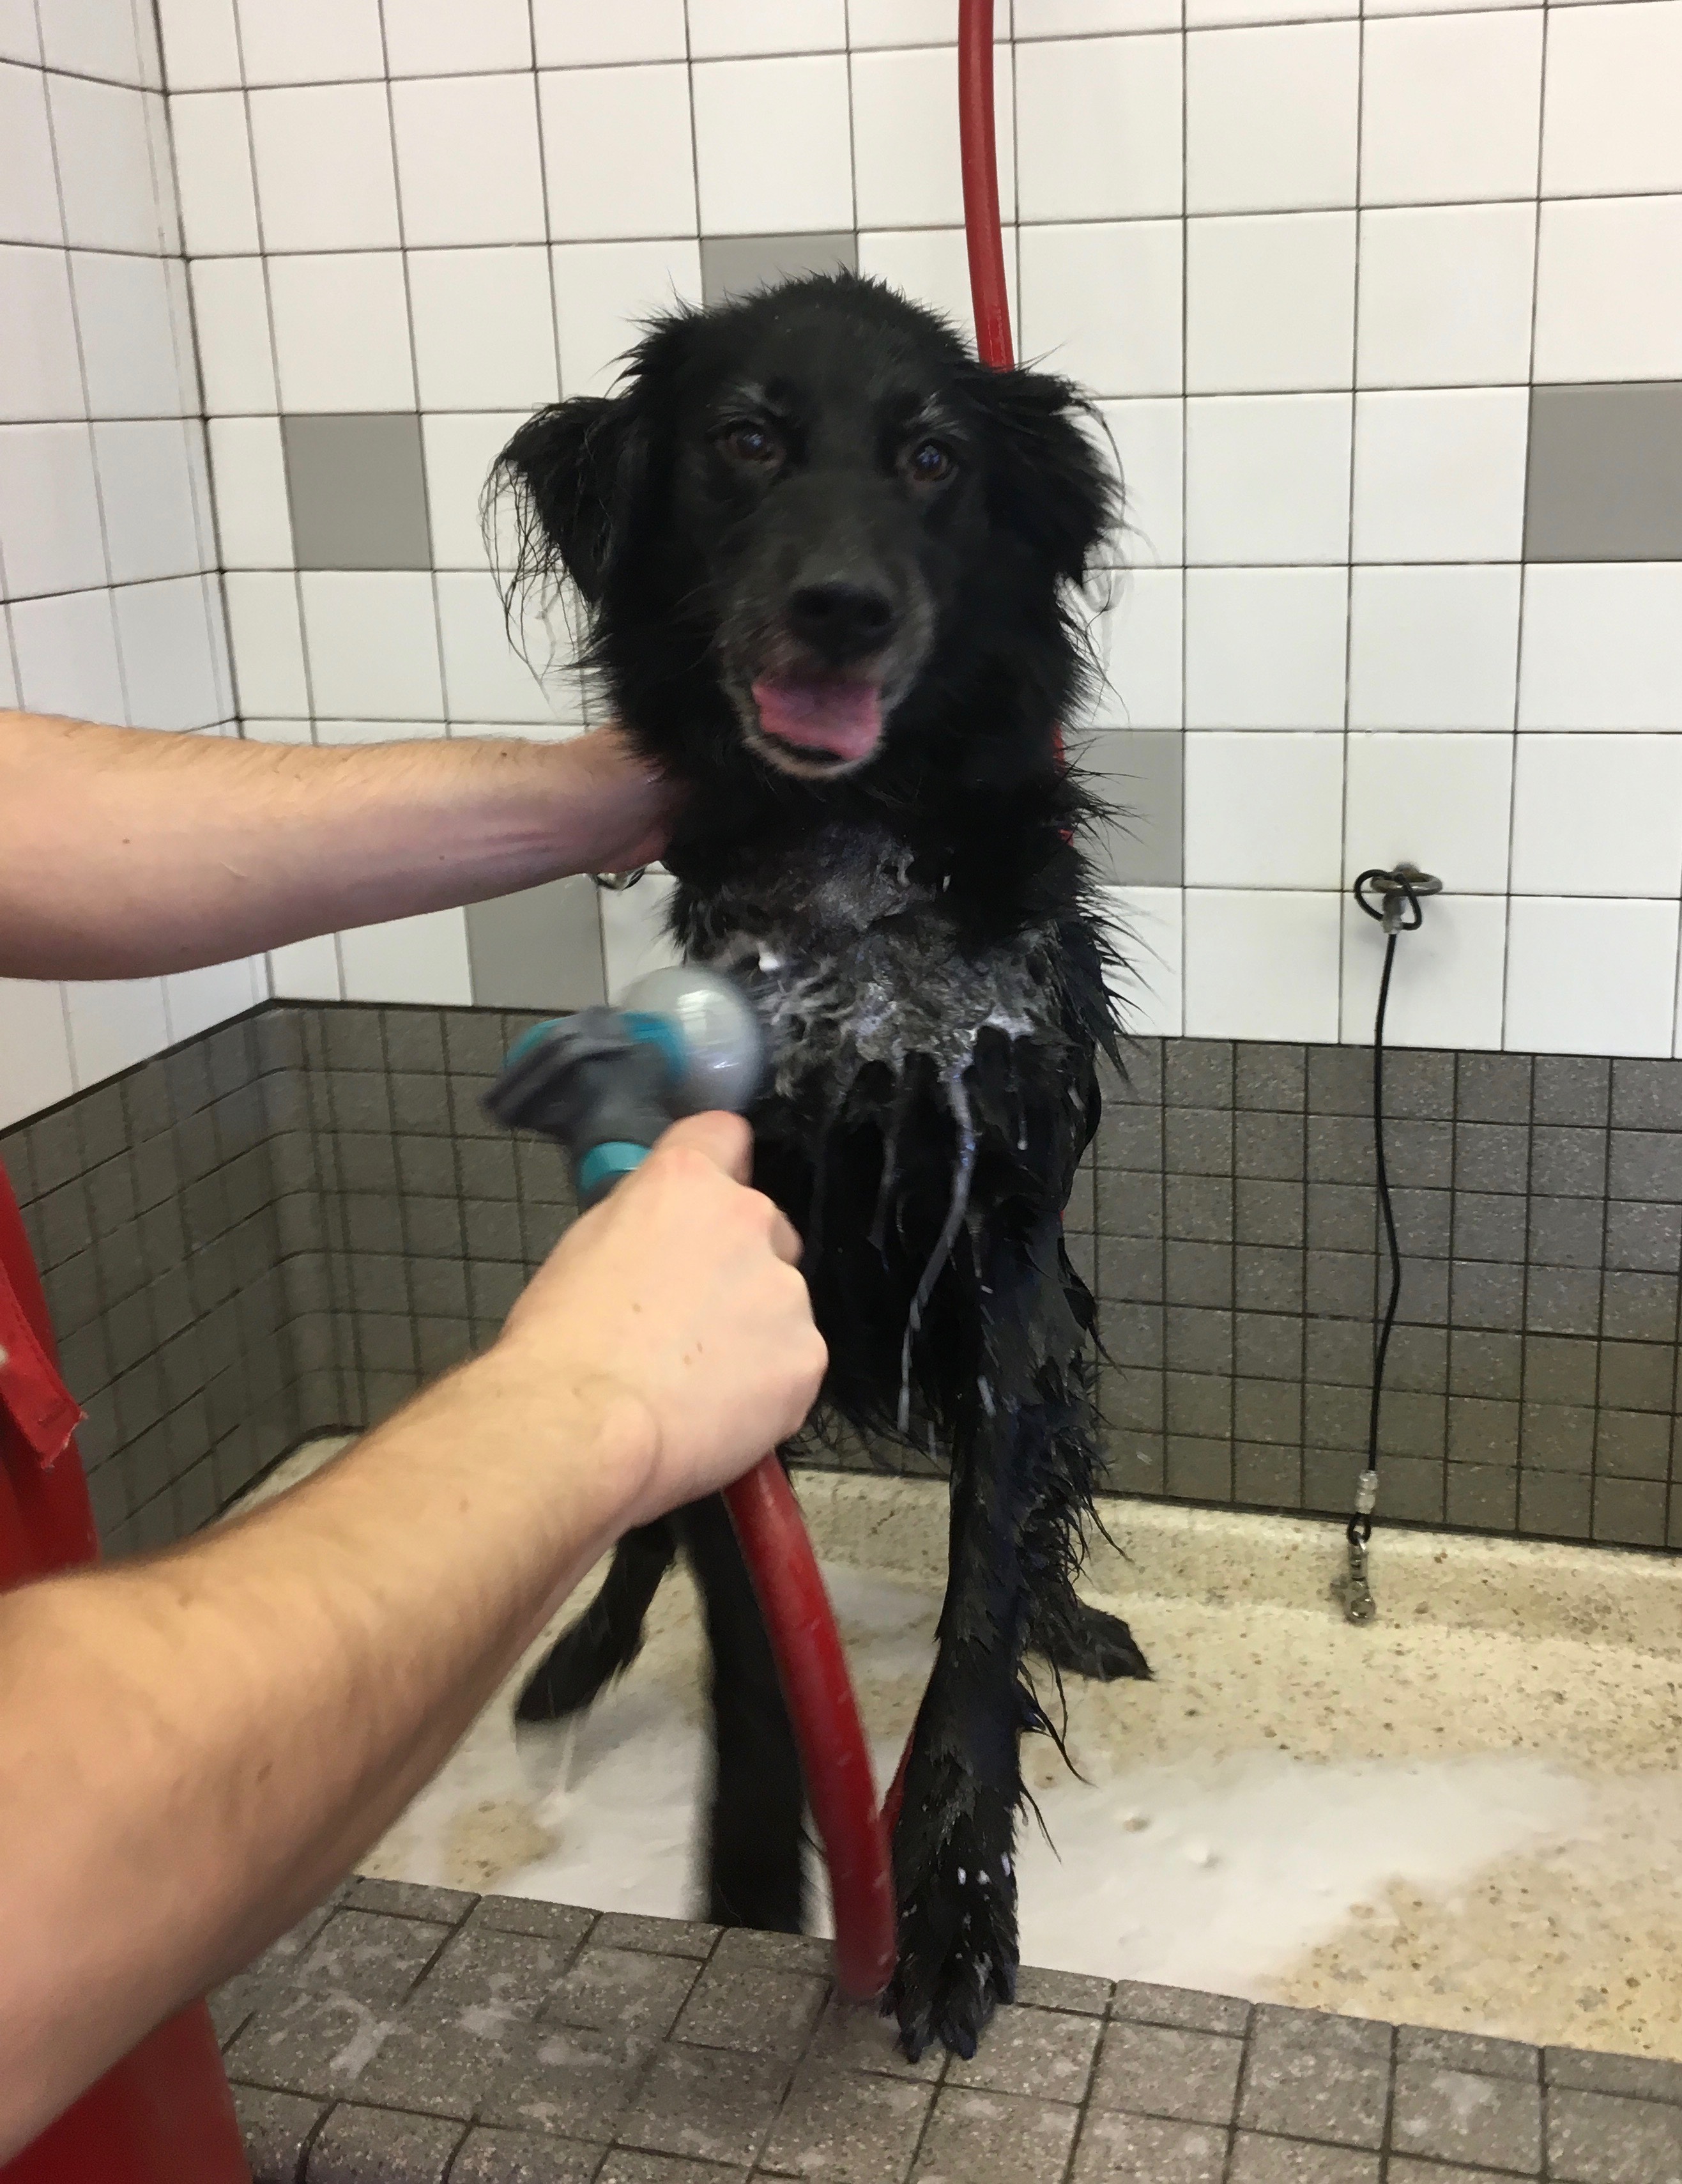 Black Border Collie Mix In A Bathtub Being Sprayed By A Hose And Not Liking It Even A Tiny Bit